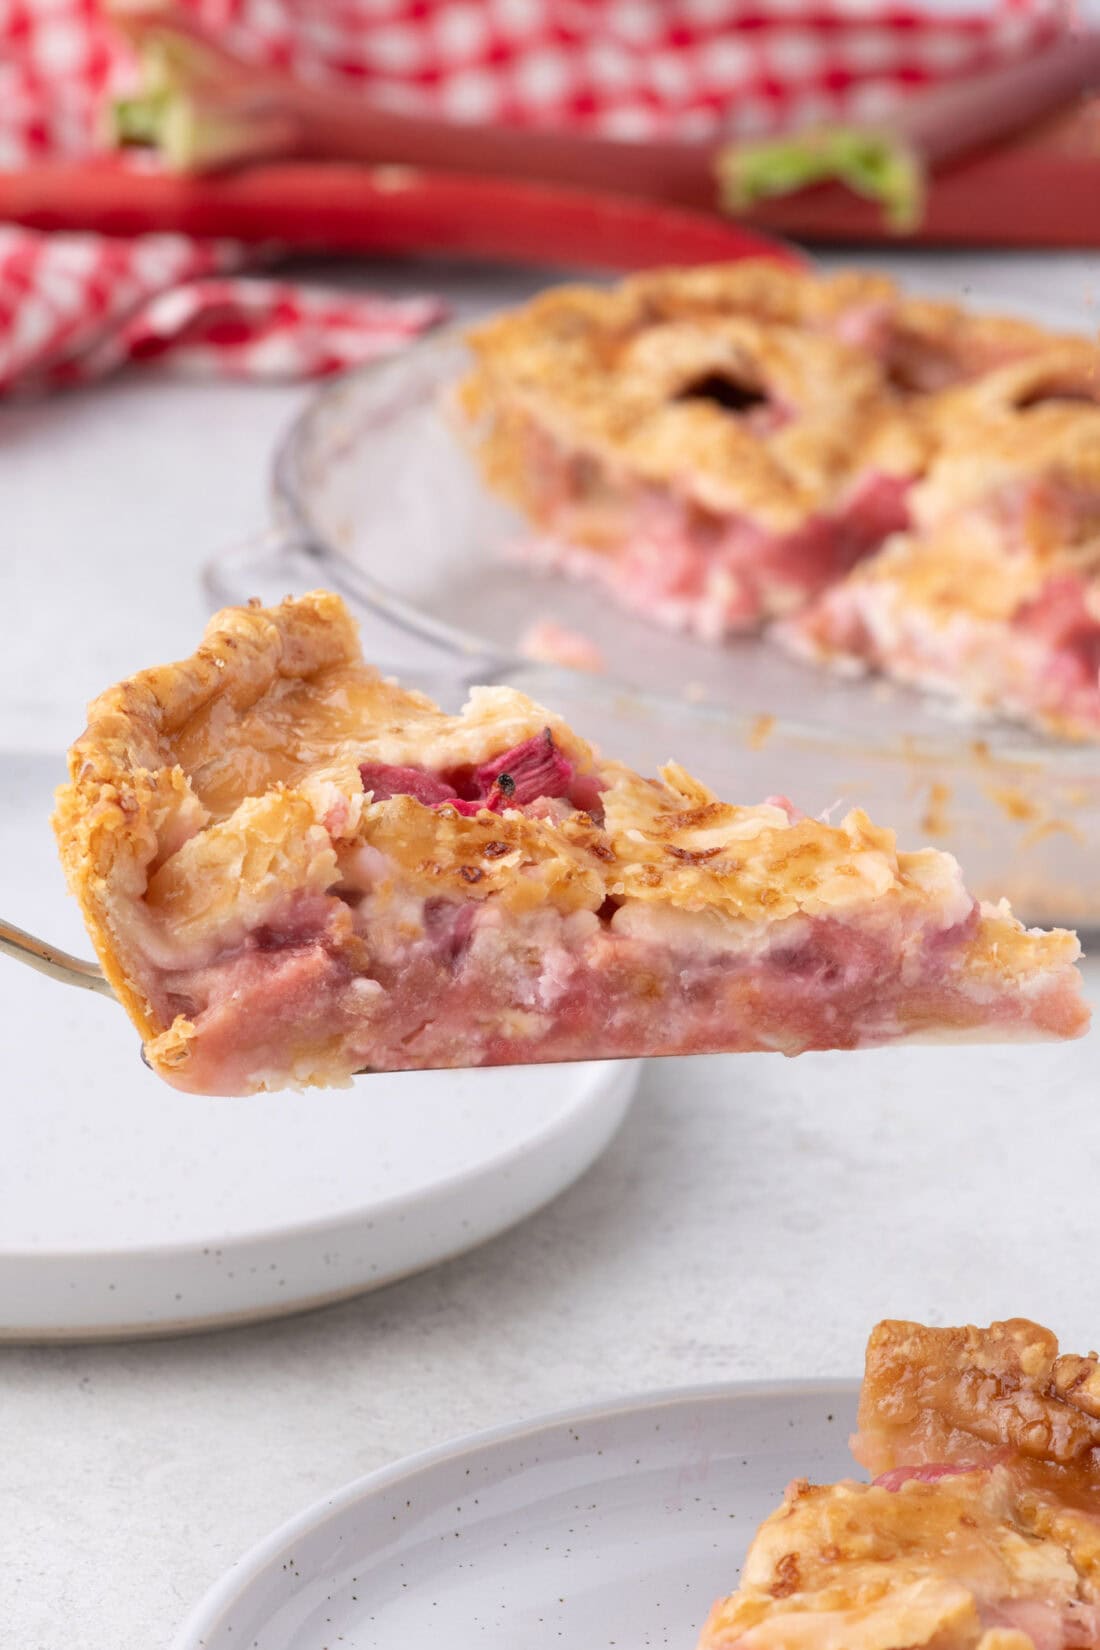 Slice of Rhubarb Pie lifted up on a pie server